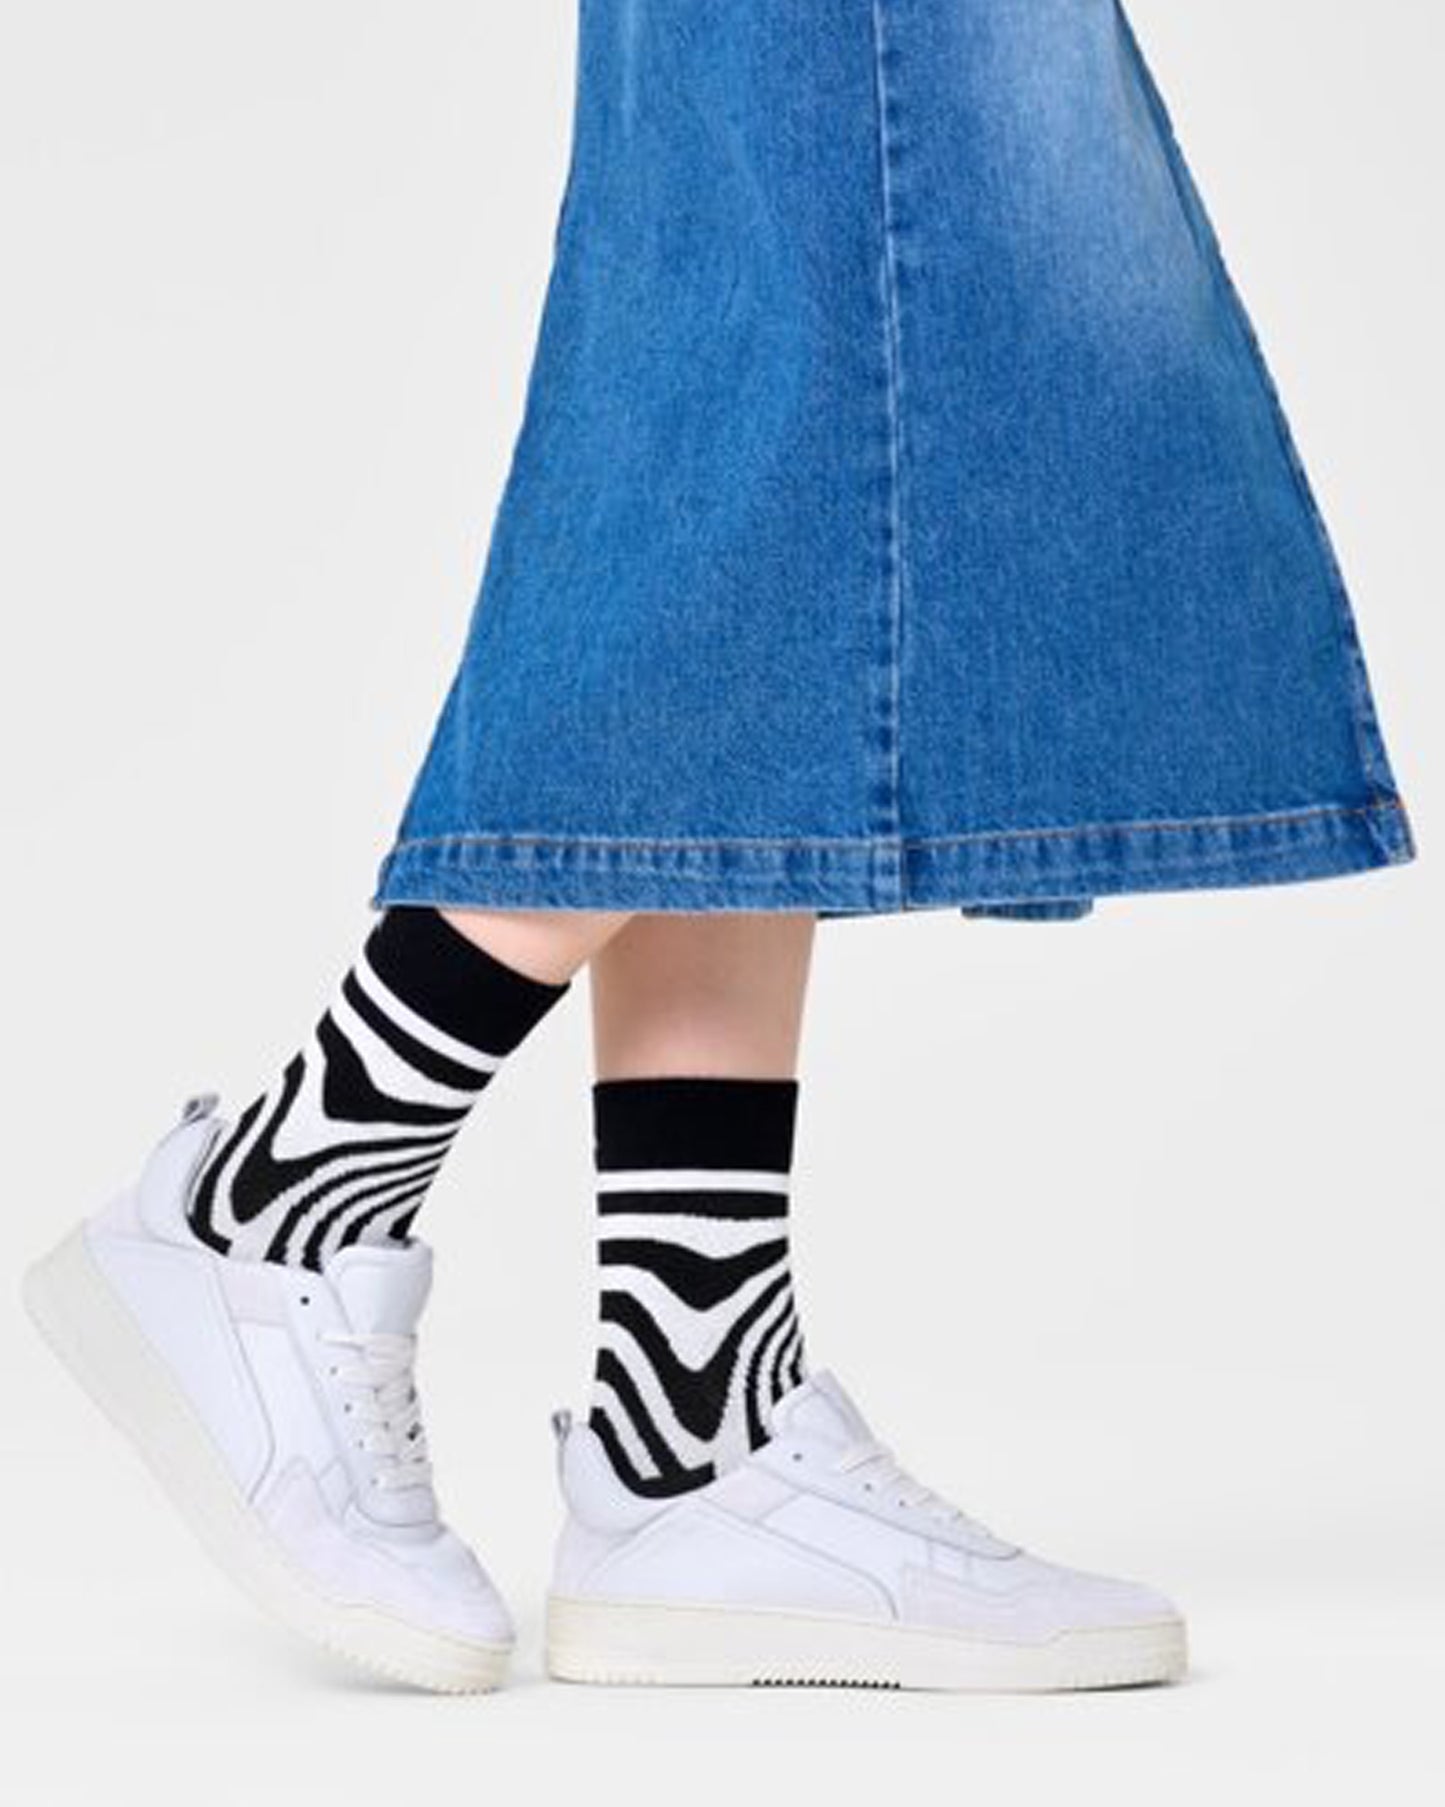 Happy Socks P000737 Dizzy Socks - Black cotton crew length ankle socks with a swirling psychedelic style linear pattern in white. Worn with denim skirt and white trainers.